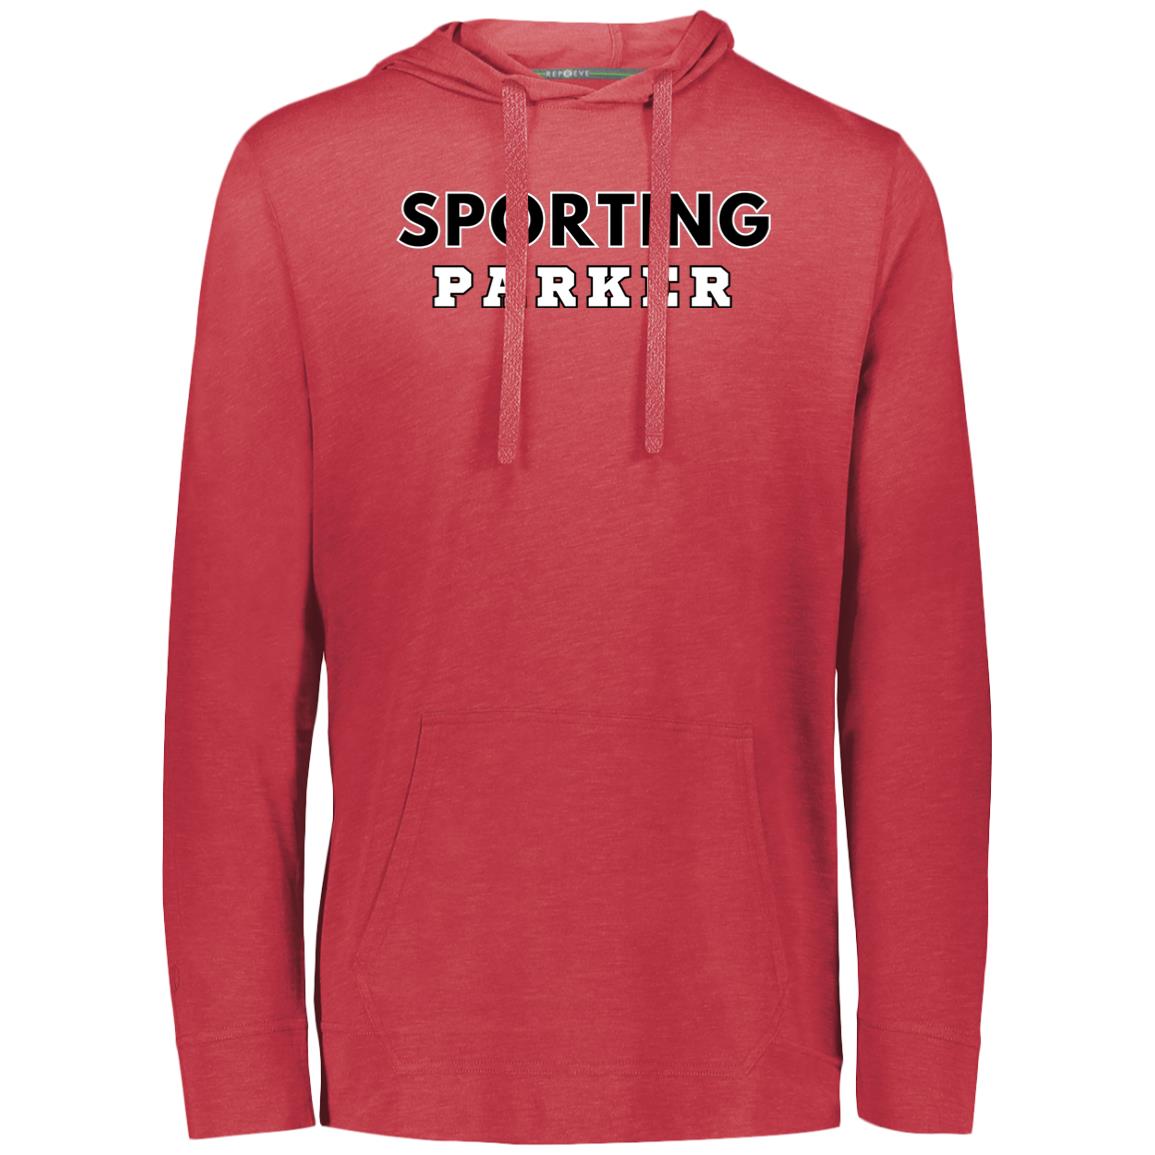 Red Sporting Parker Adult T-Shirt